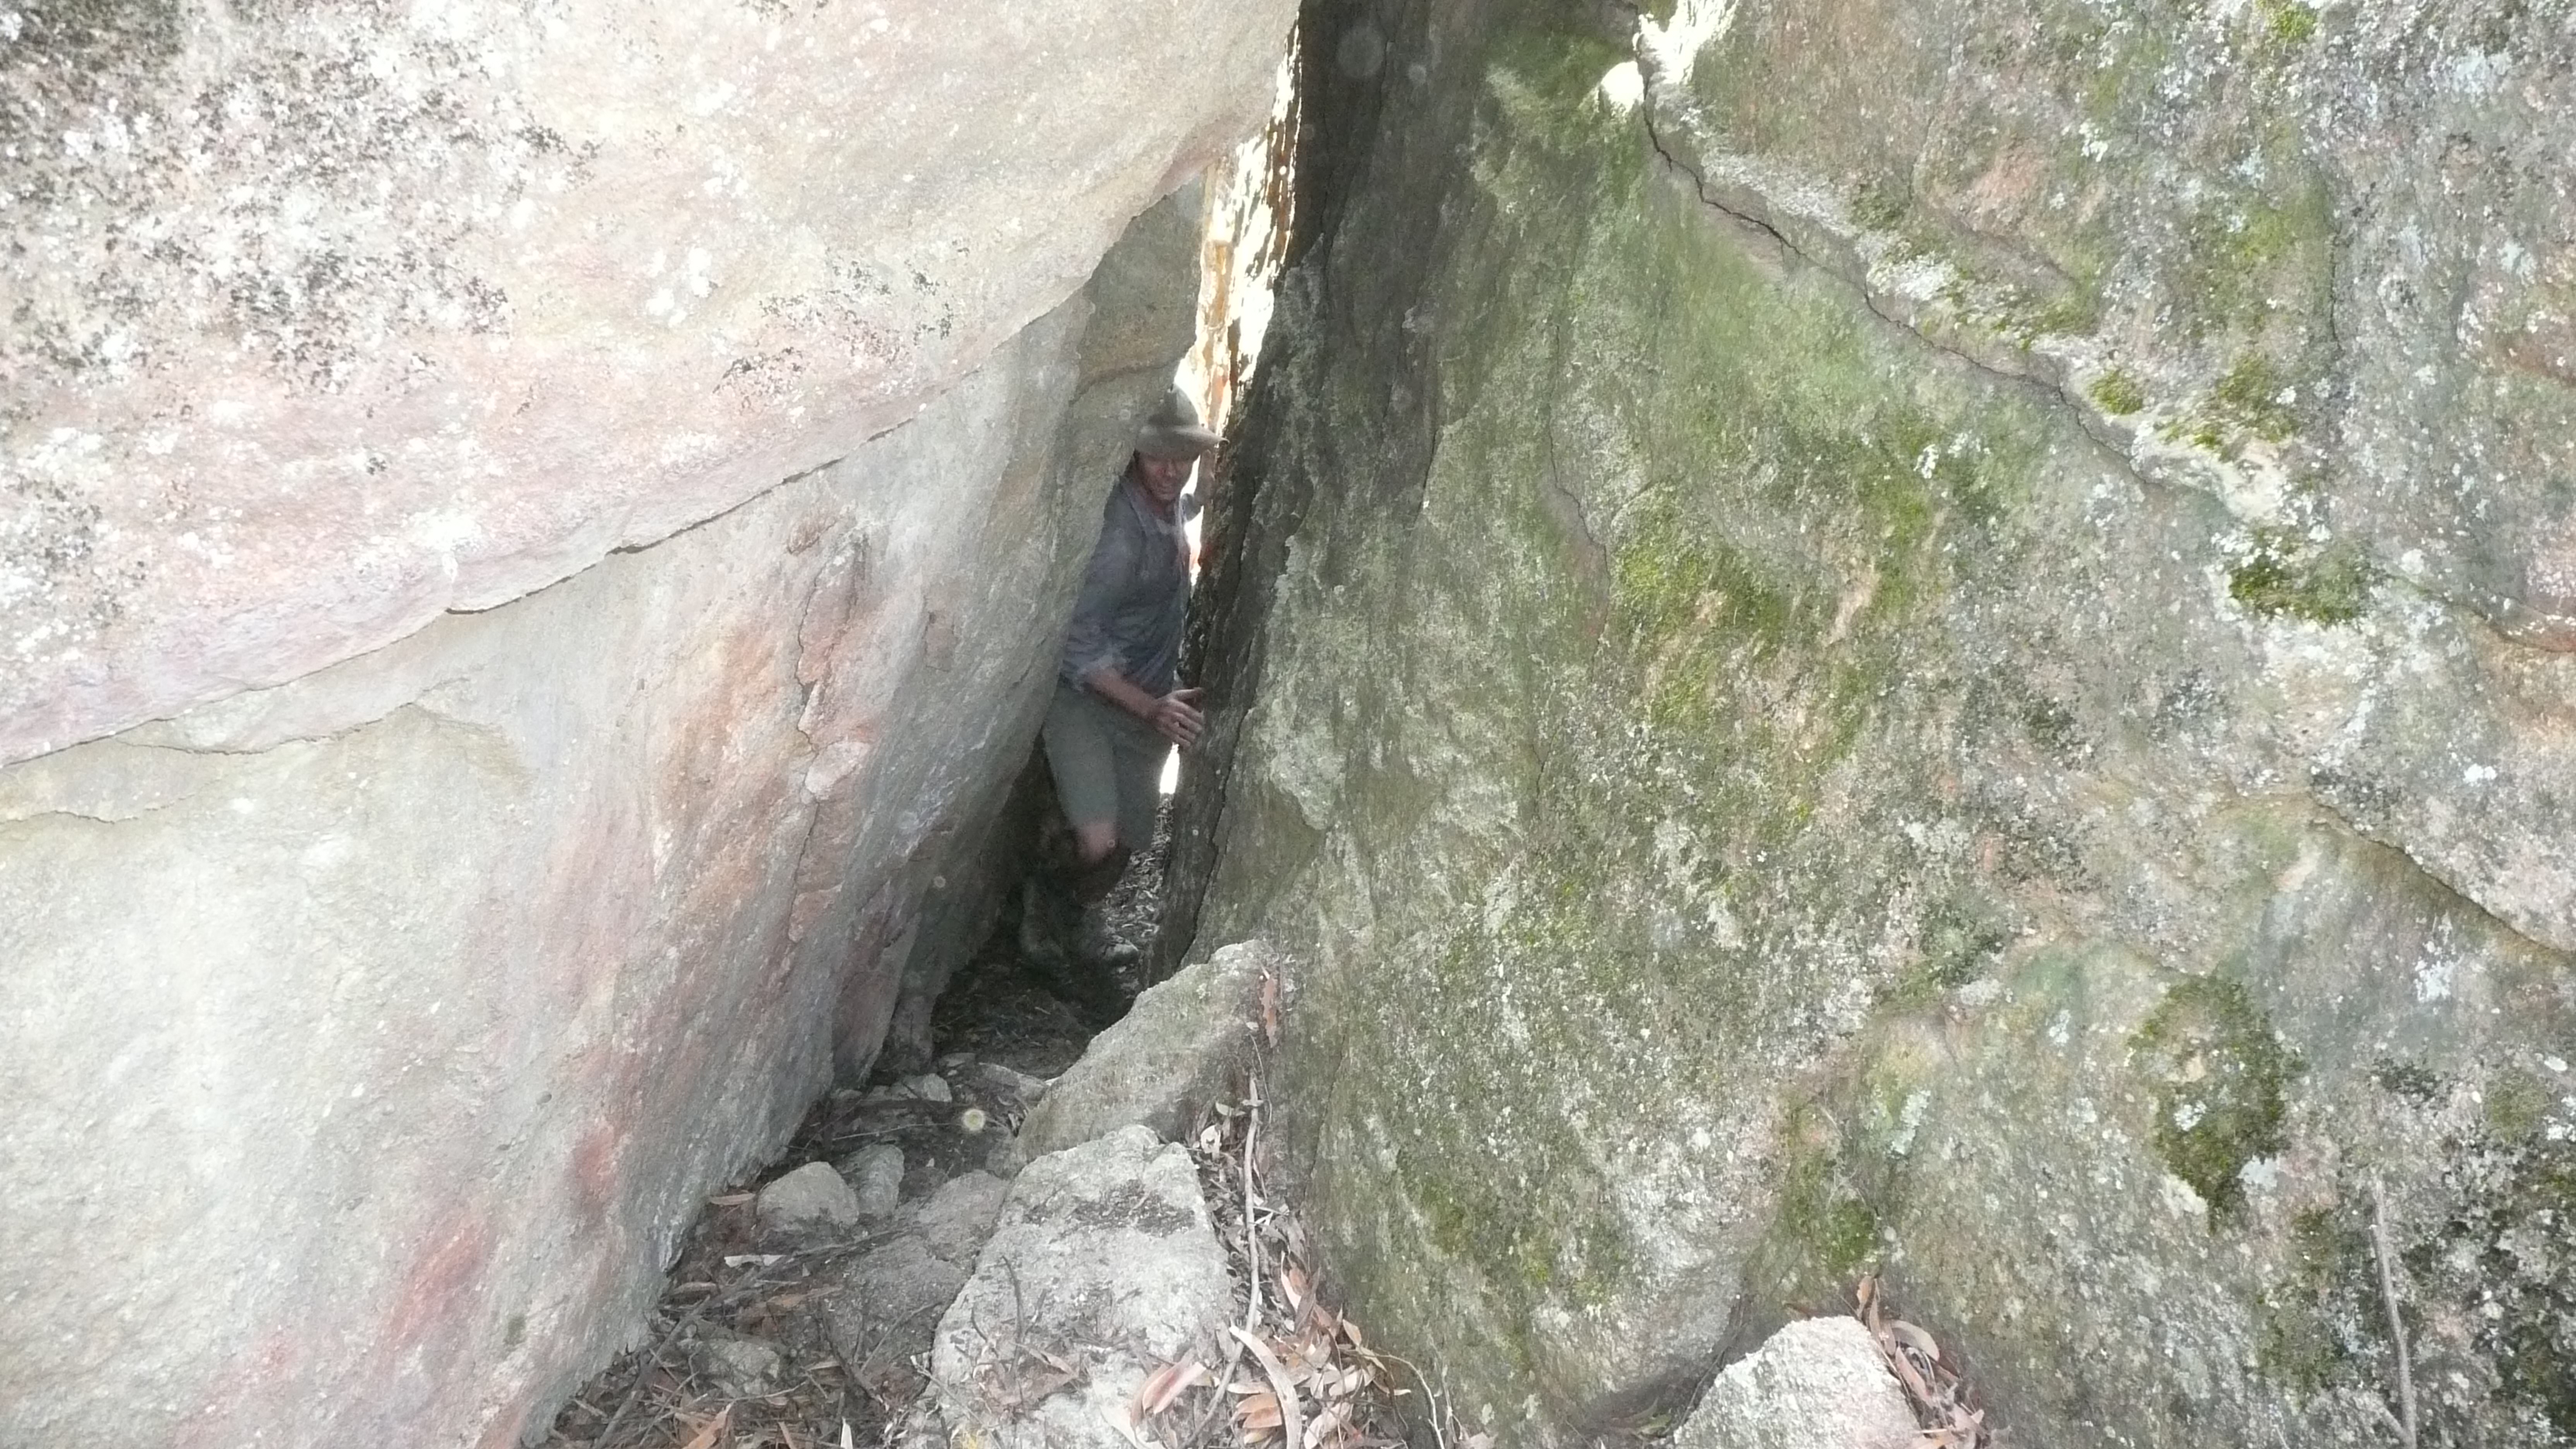 A narrow passage we found when we explored a little canyon formation